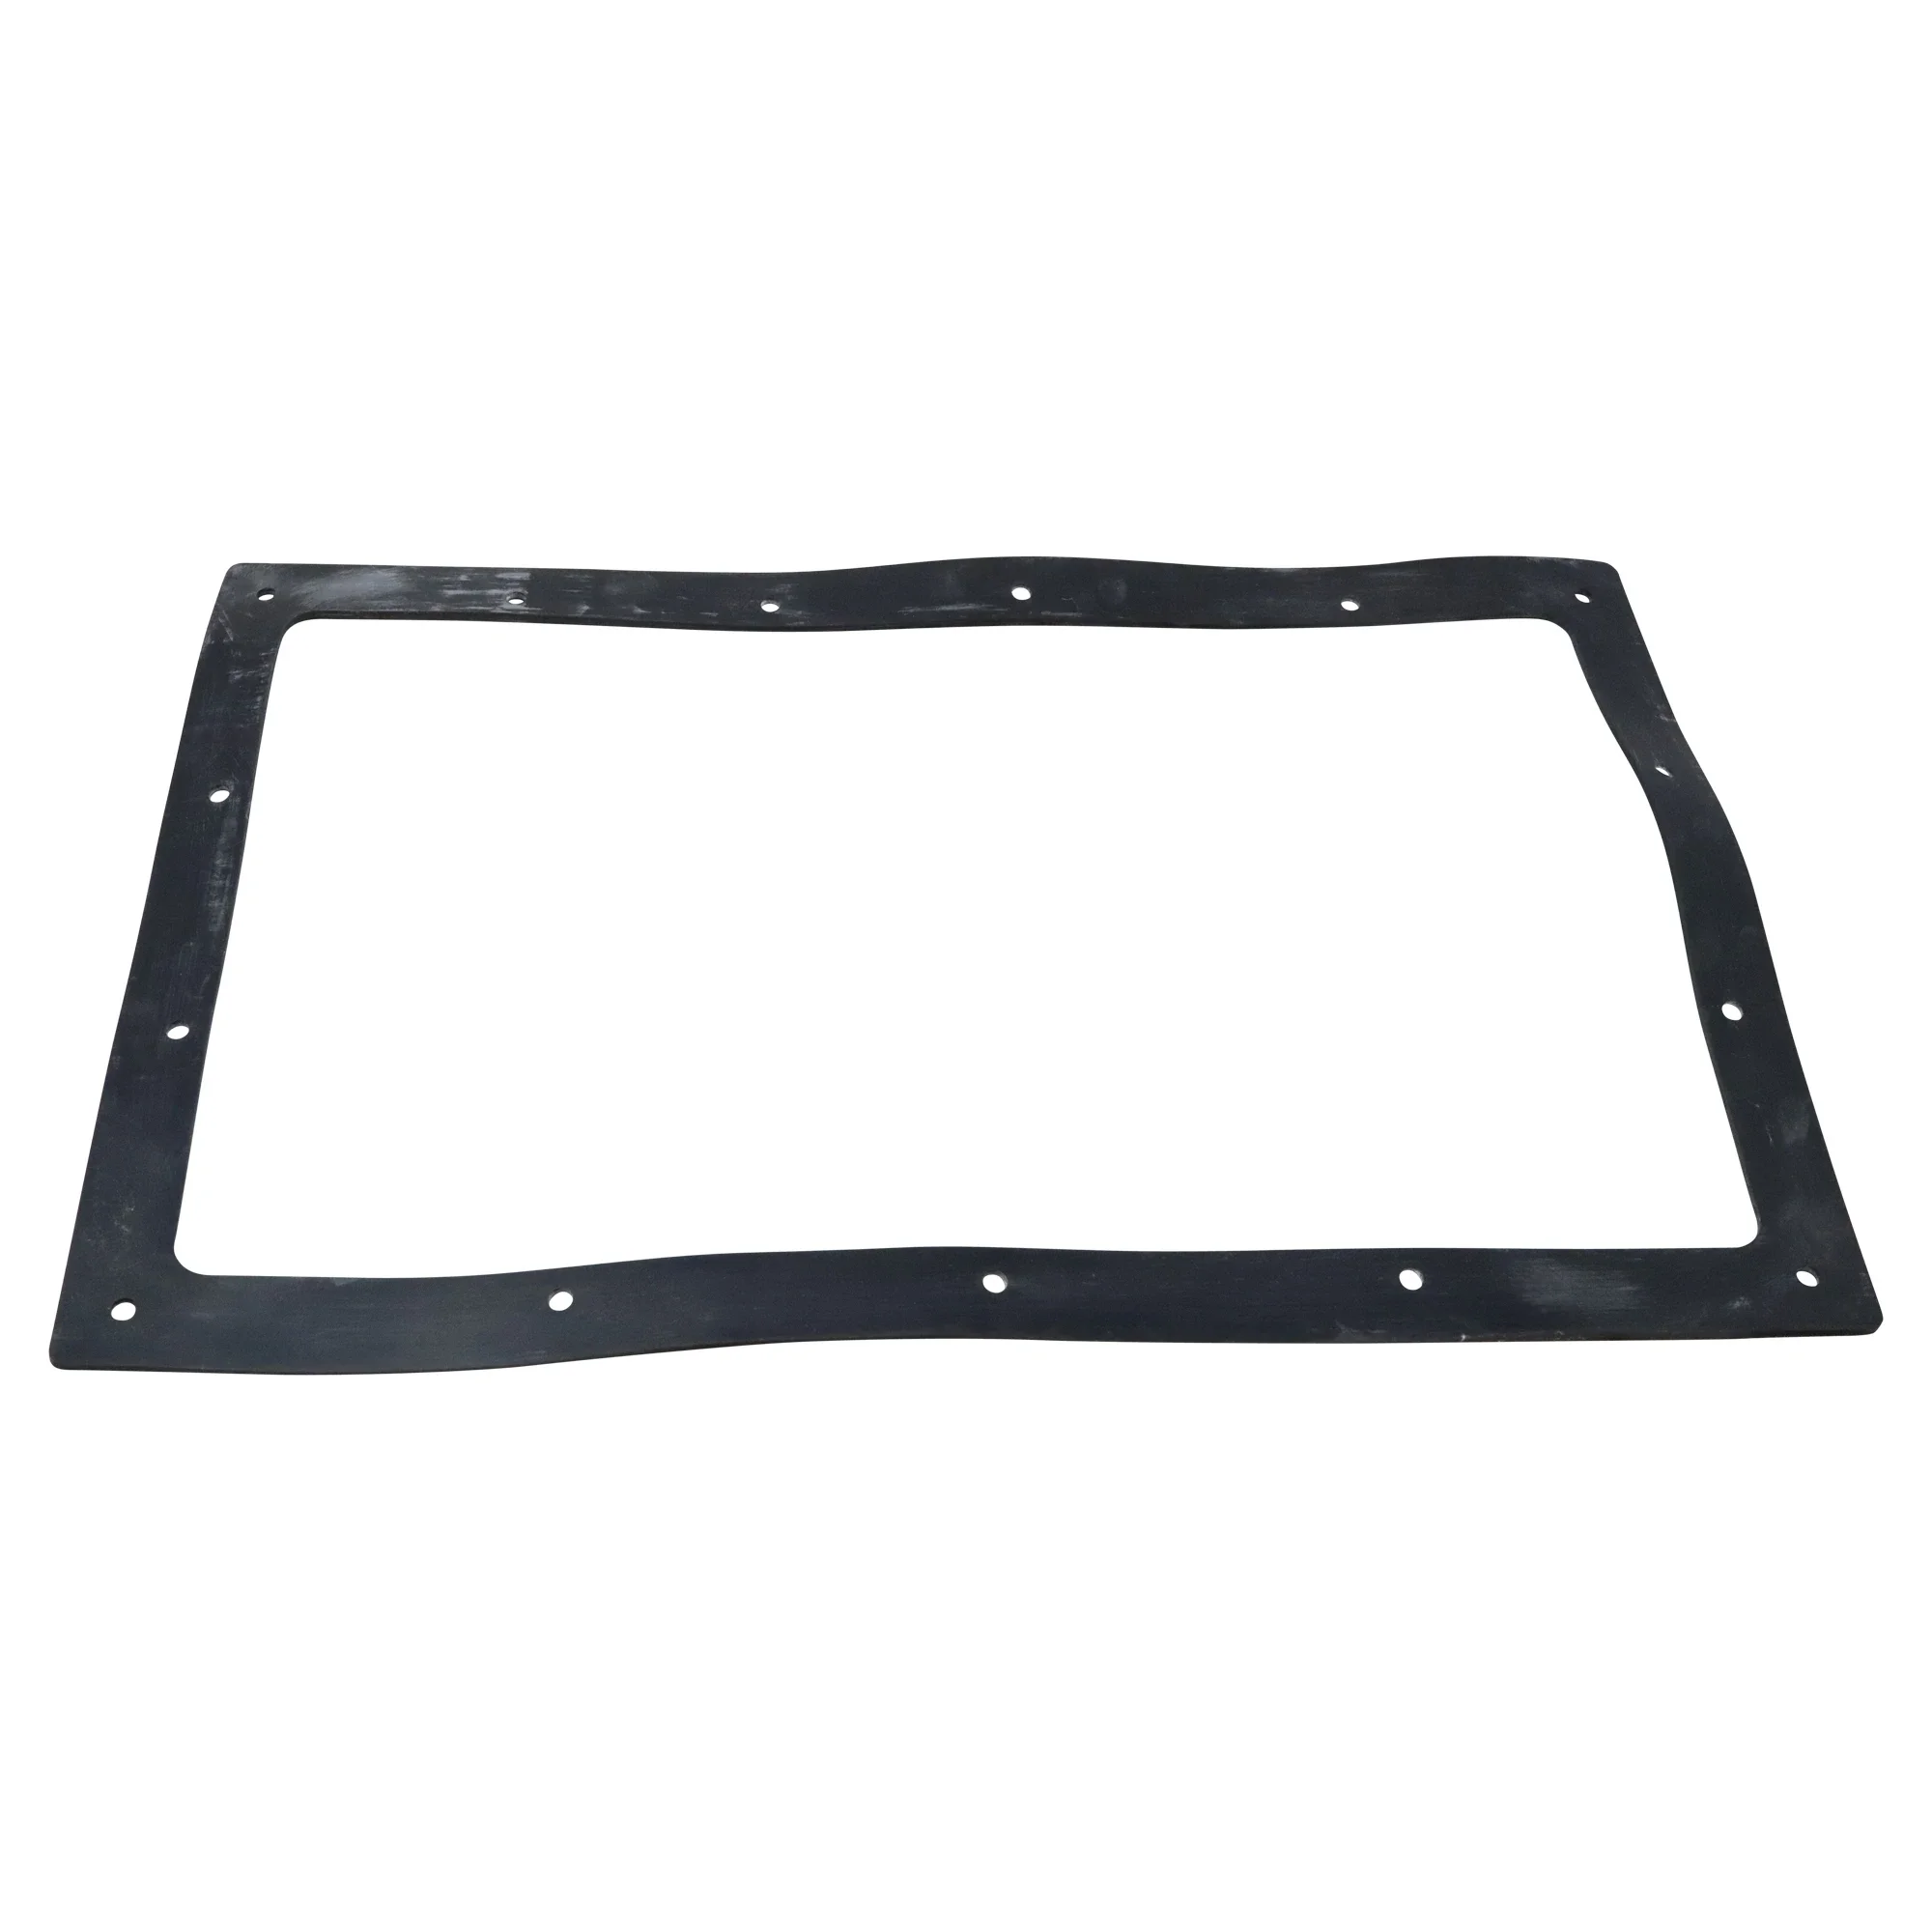 Wastebuilt® Replacement for Leach 12" x 8" Gasket